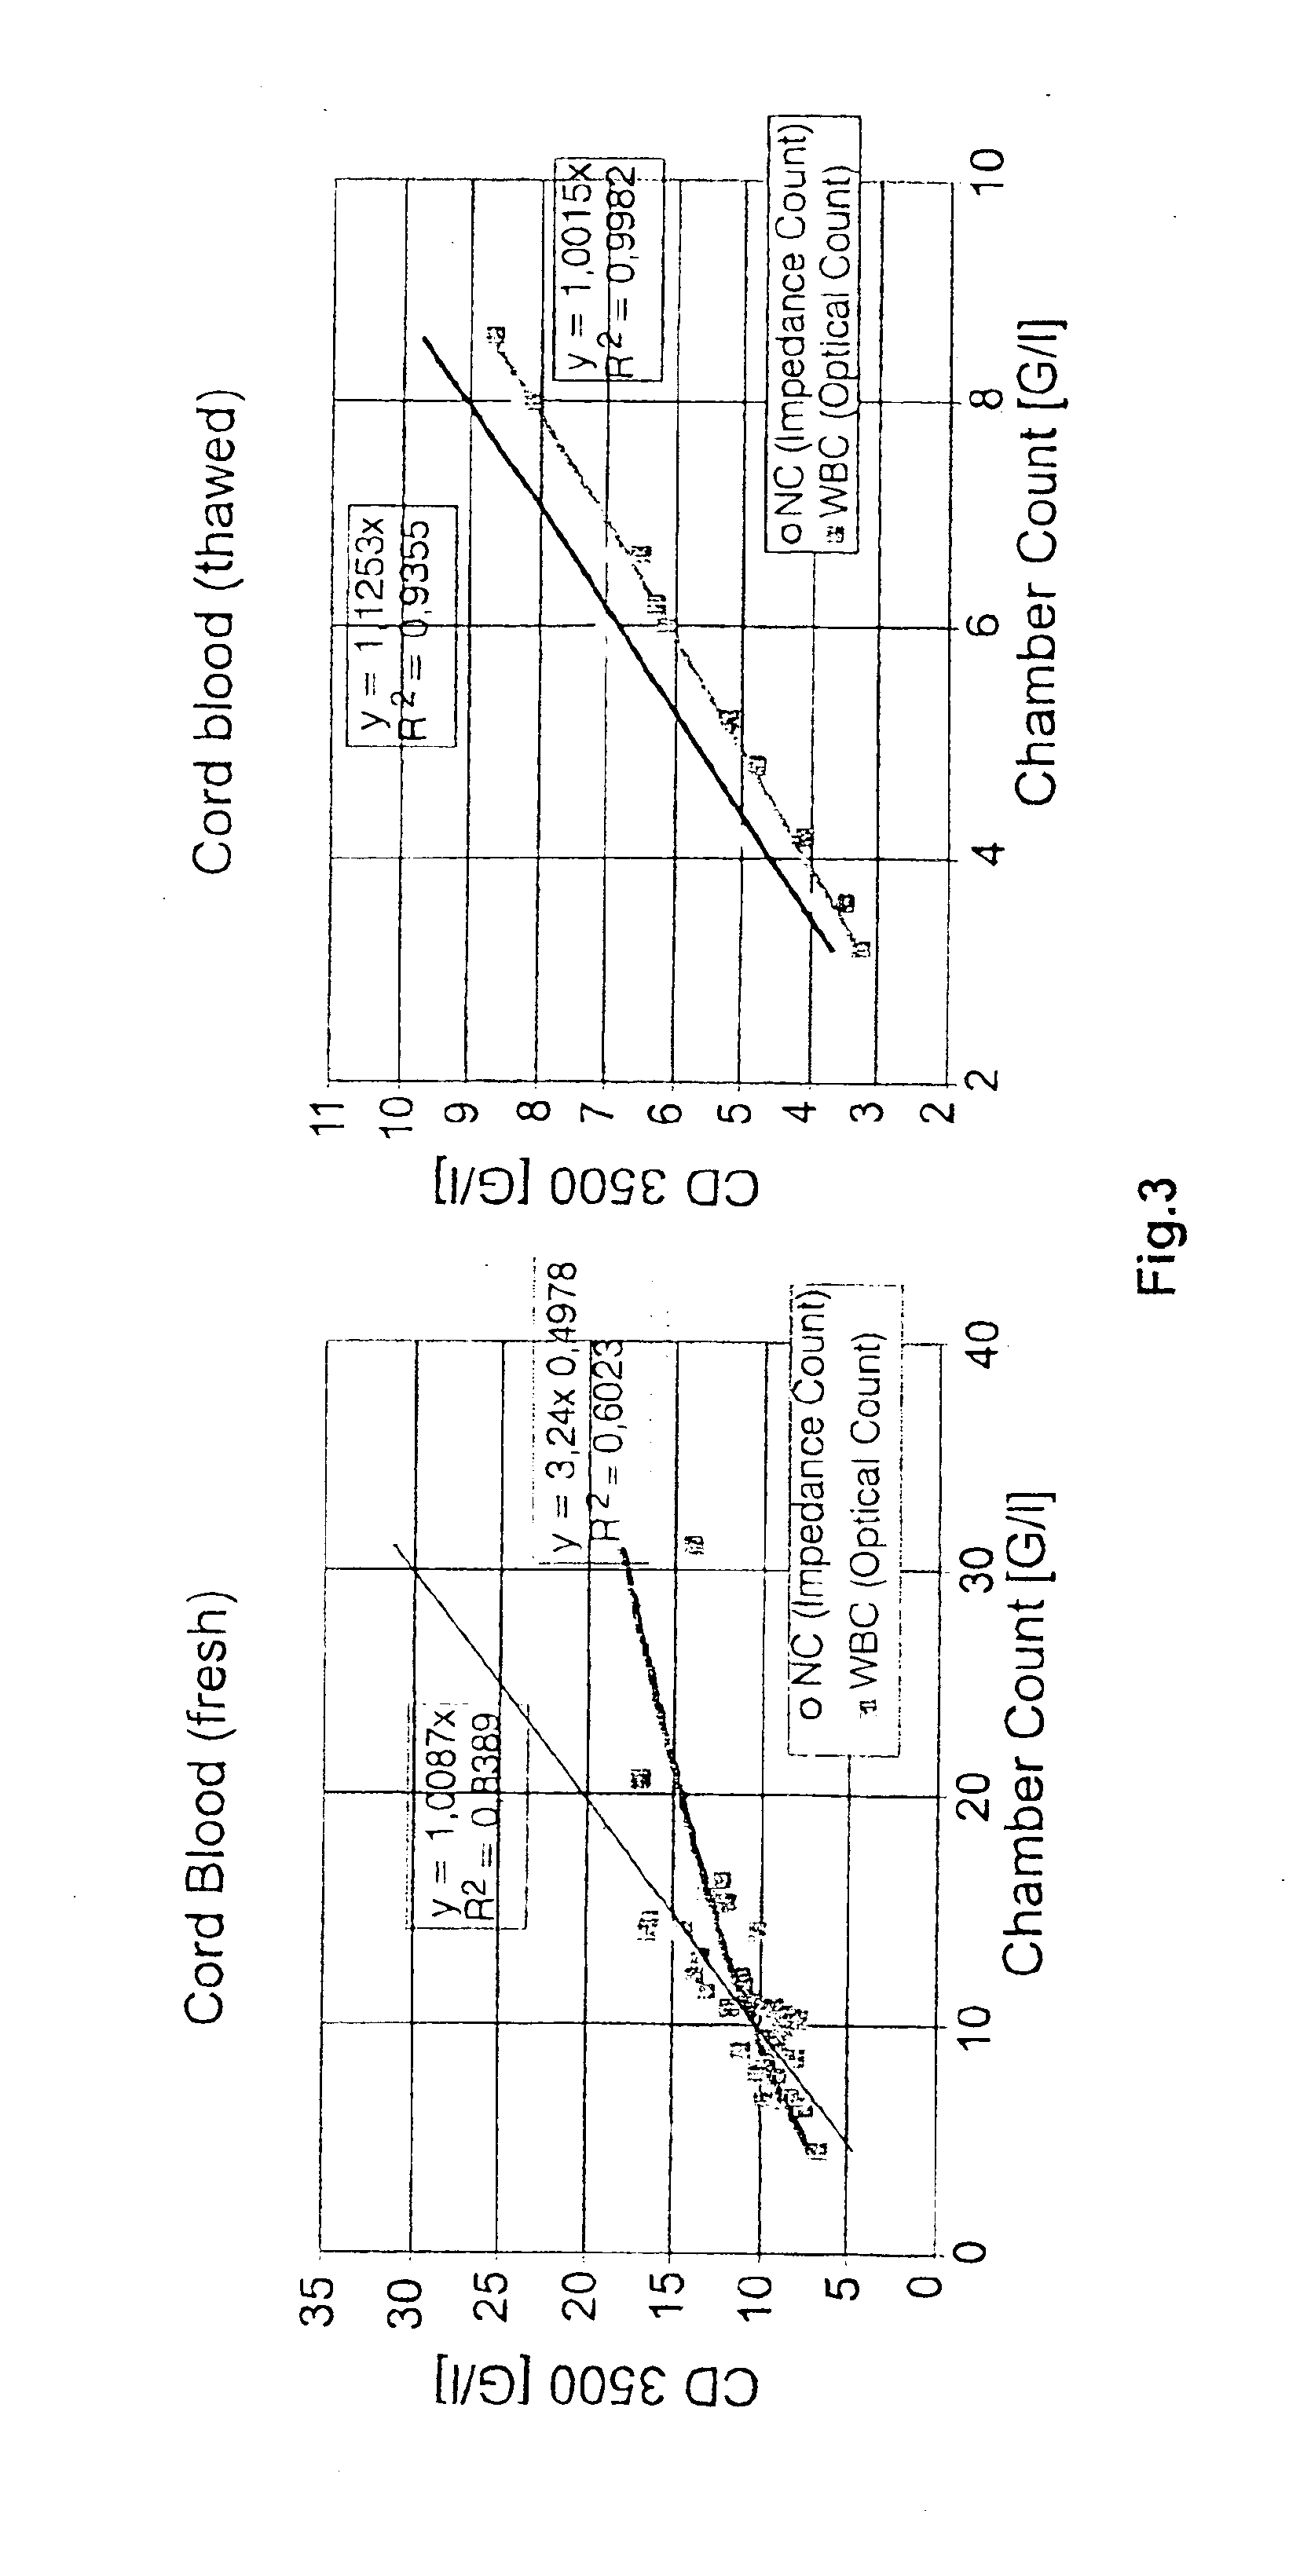 Method to determine an engrafting cell dose of hematopoietic stem cell transplant units